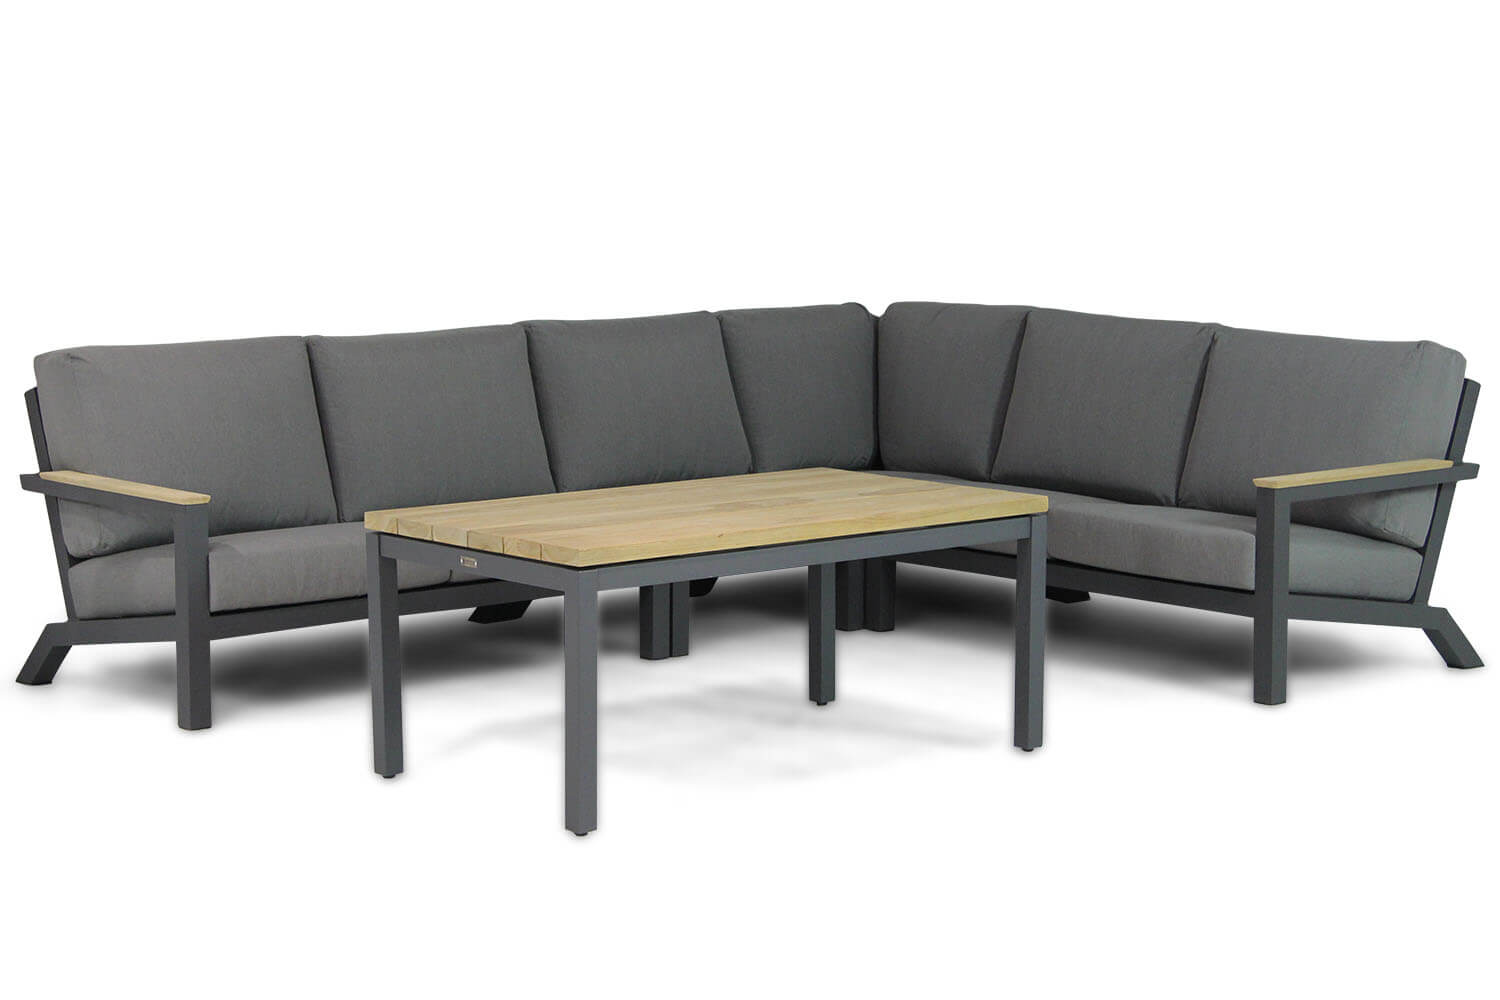 4 Seasons Outdoor Capitol/Lifestyle Riviera 140 cm dining loungeset 5-delig aanbieding